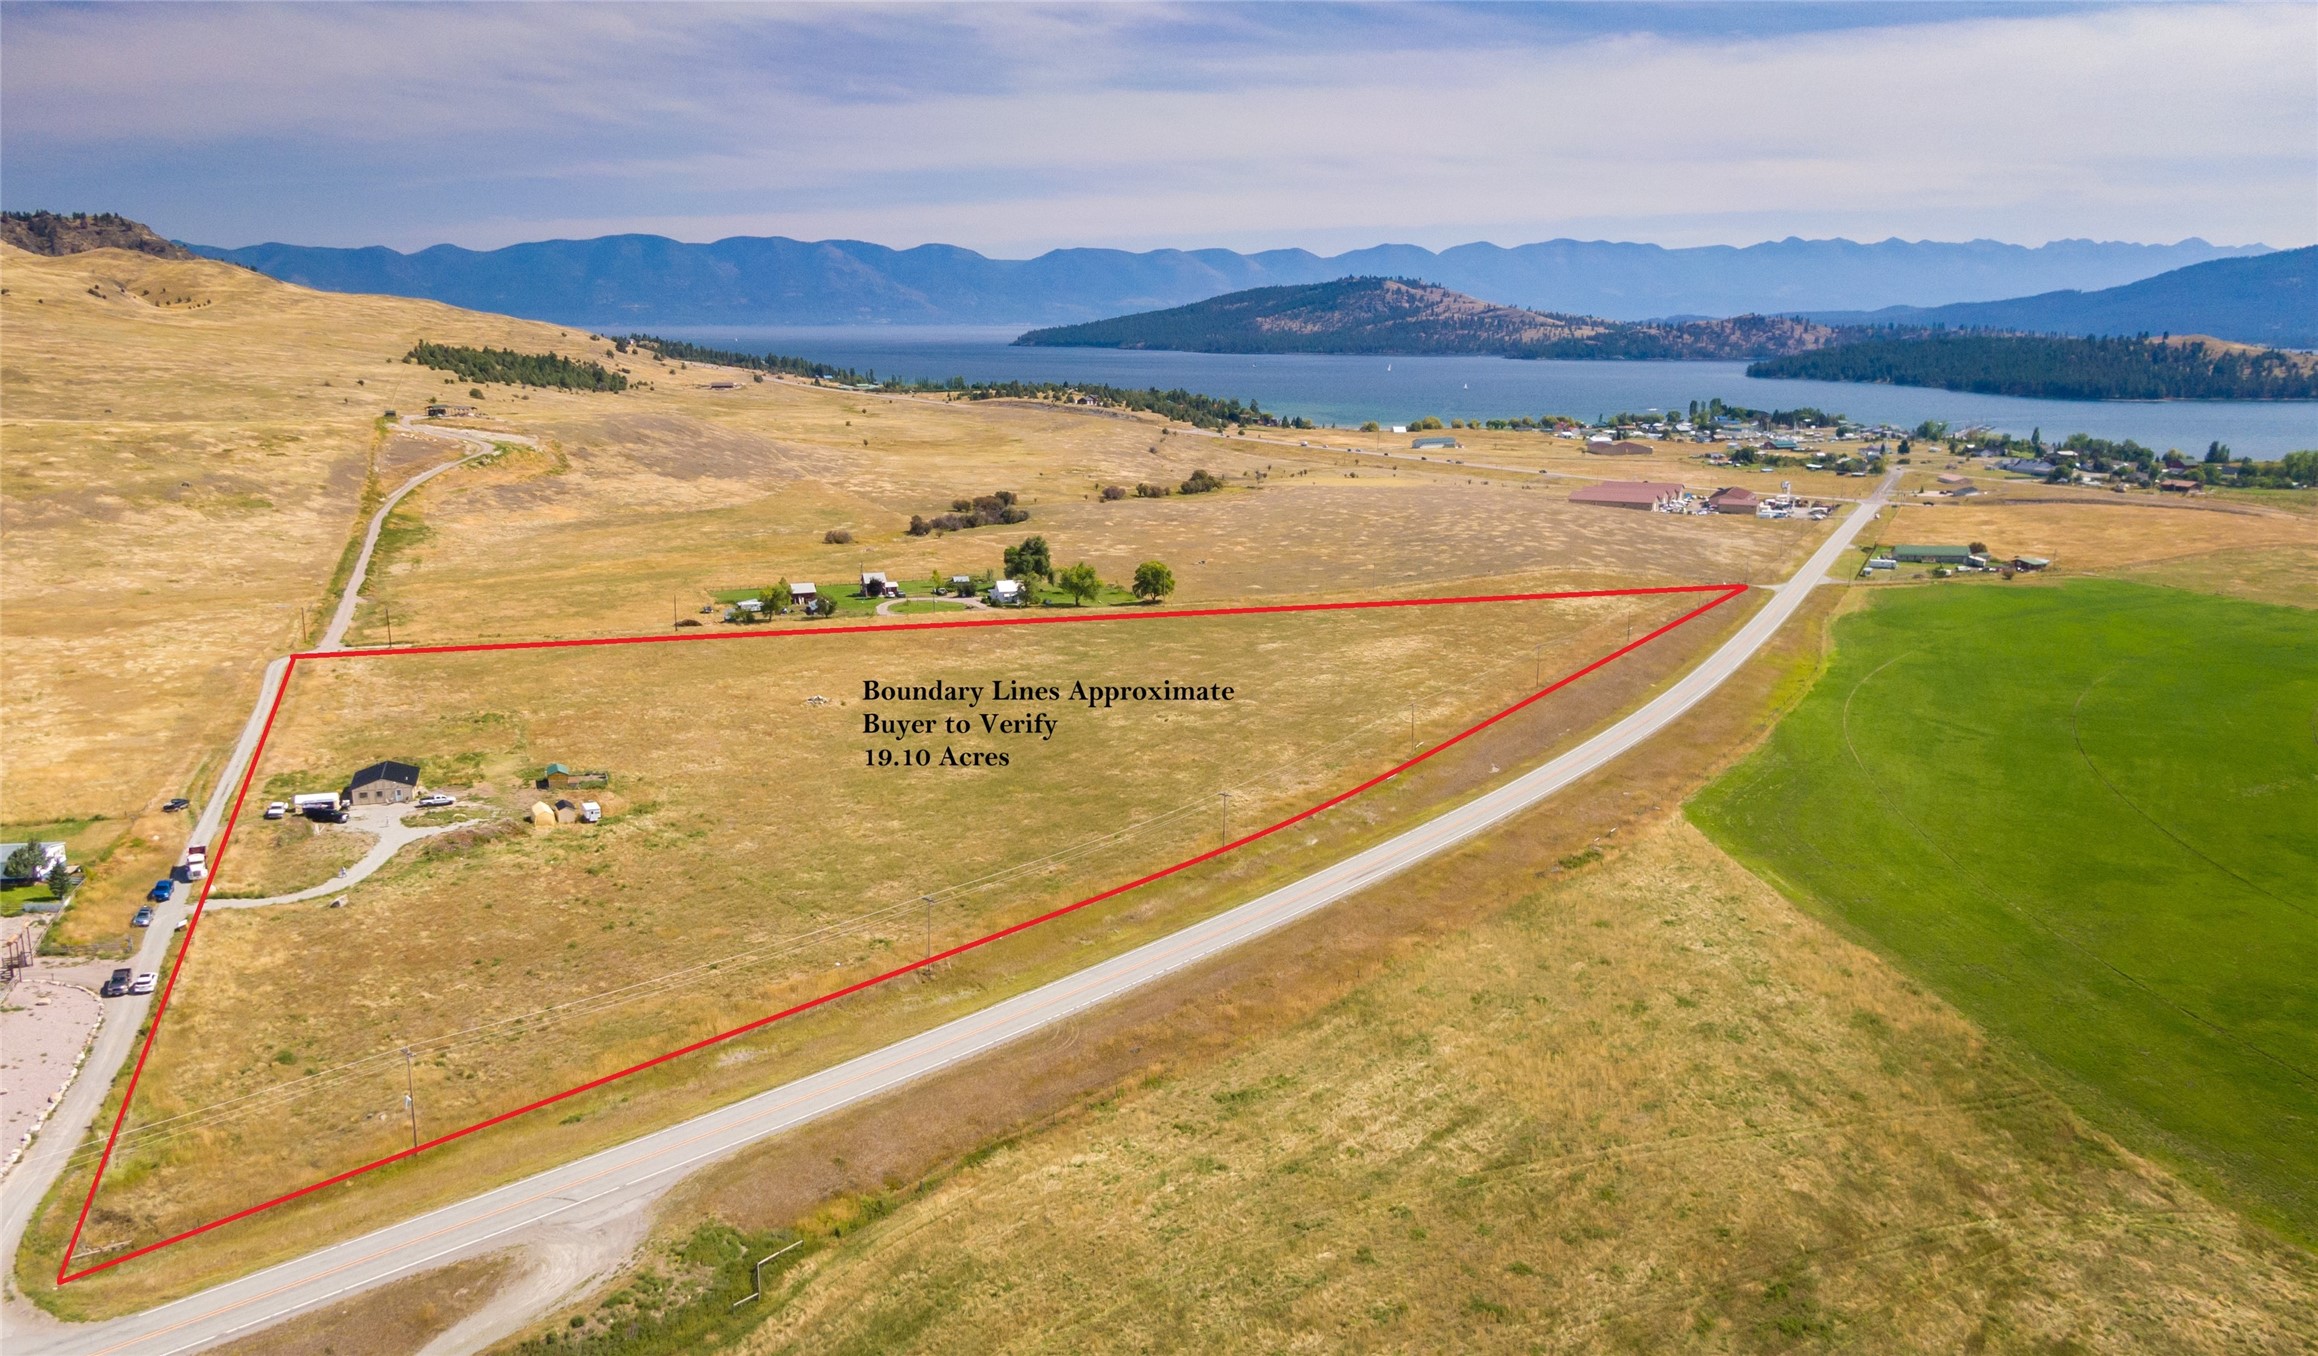 Come build your dream home from this private and gently rolling 19+ acre parcel with exceptional lake and mountain views!  Located at the doorstep to an unlimited supply of outdoor recreational opportunities in the coveted Northwestern region of MT- just minutes to Flathead Lake, Lake Mary Ronan and Blacktail Mountain Ski Area.  This property has undergone extensive infrastructure improvements since 2021, which will save the future owner substantial time and upfront costs.  Sale includes an existing well, 5-bedroom septic for plenty of sizing flexibility in the future residence, and a 1,200 sqft shop converted living quarters- allowing the future owner the convenience of living on site while building their primary dwelling!  The existing living quarters features two private rooms, full bathroom, open concept living area, full kitchen, efficient fireplace and in-floor heating system.  No covenants. Easy access to highway 93, only 30 minutes to Kalispell (one of Montana’s fastest growing cities, equipped with an international airport) for all your shopping, healthcare, and dining needs!  Don’t miss the opportunity to claim this desirable piece of property in the Treasure State!  Call Cole Wallace at 406-883-5387 or your real estate professional for additional information or to schedule a showing today.